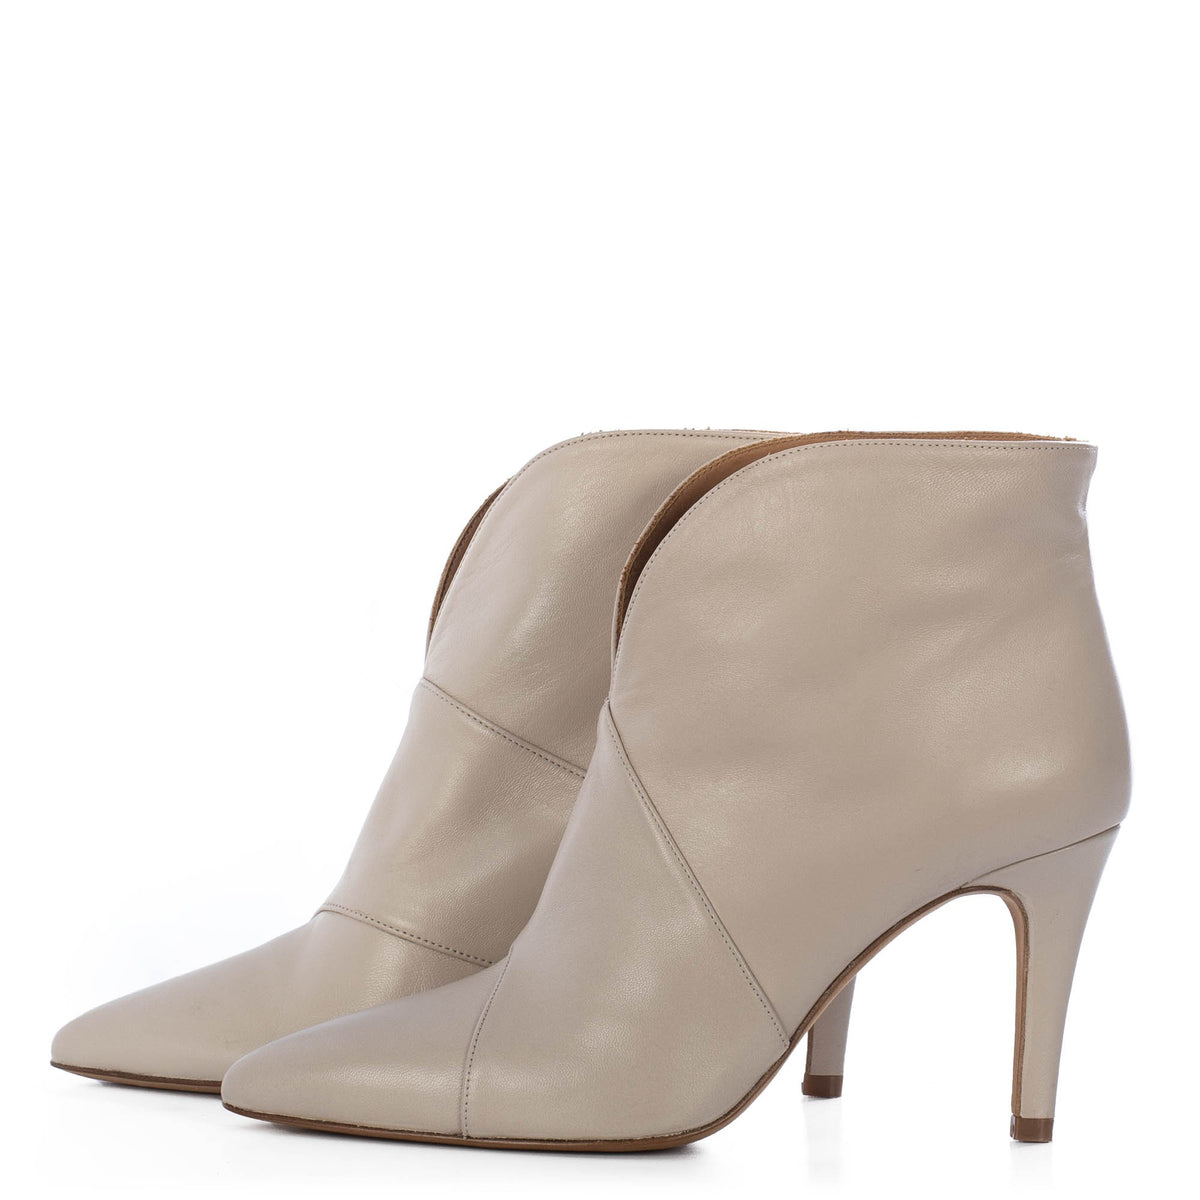 TORAL CREAM LEATHER ANKLE BOOTS – Toral